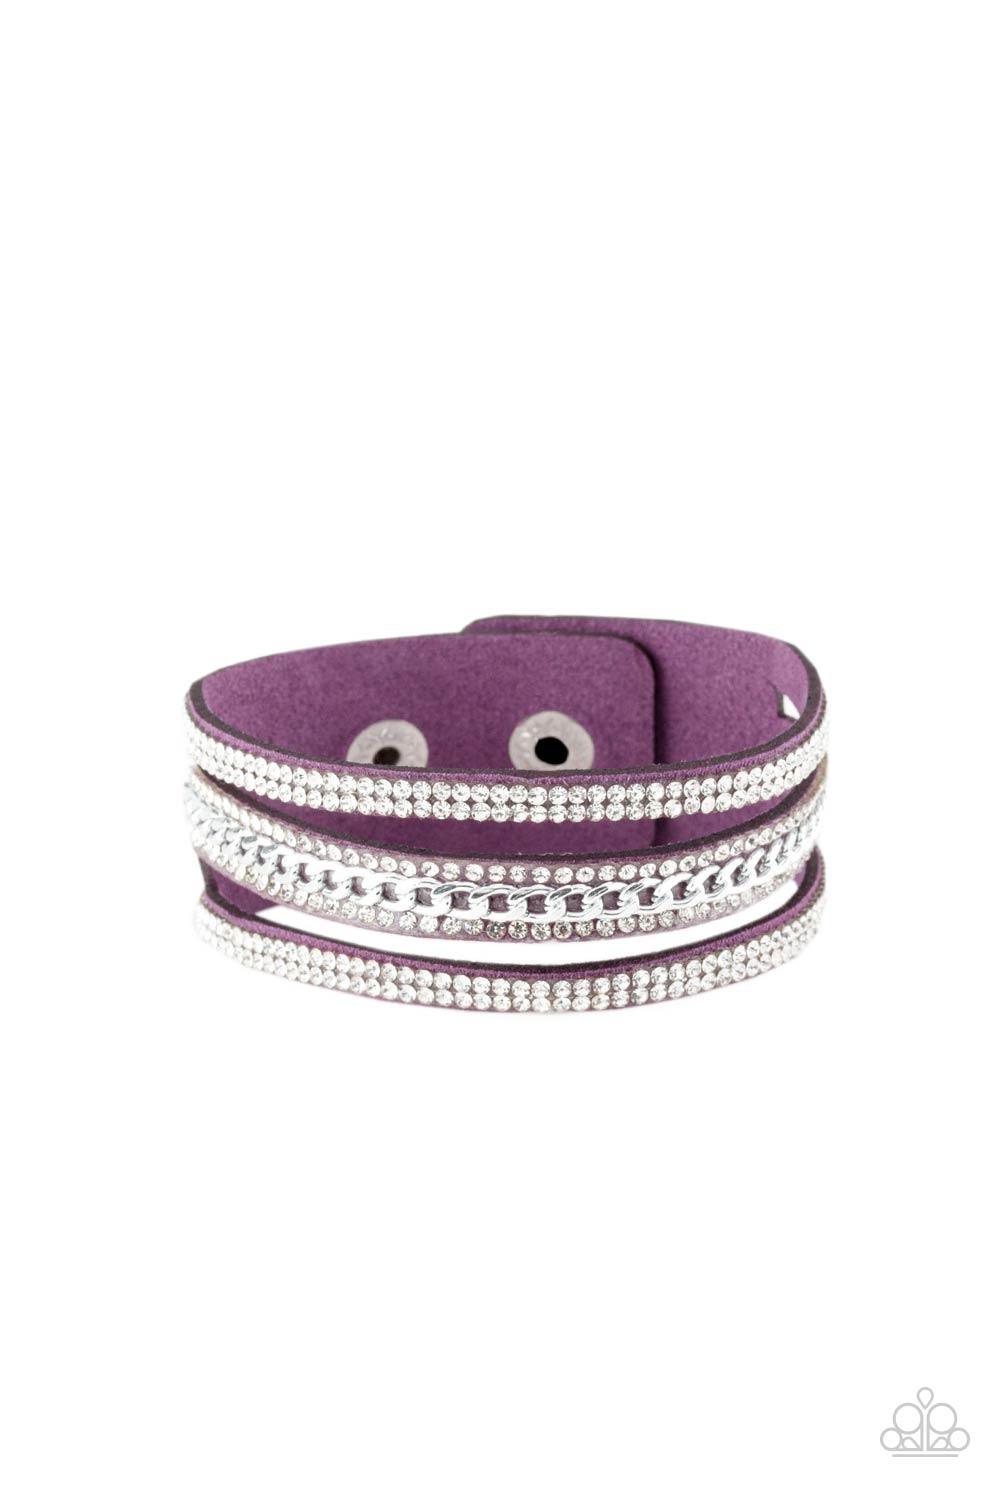 Paparazzi Accessories Rollin’ In Rhinestones - Purple Rows of glassy white rhinestones and a shimmery silver chain are encrusted along vibrant purple suede bands for a sassy look. Features an adjustable snap closure.Sold as one individual bracelet. Jewelr